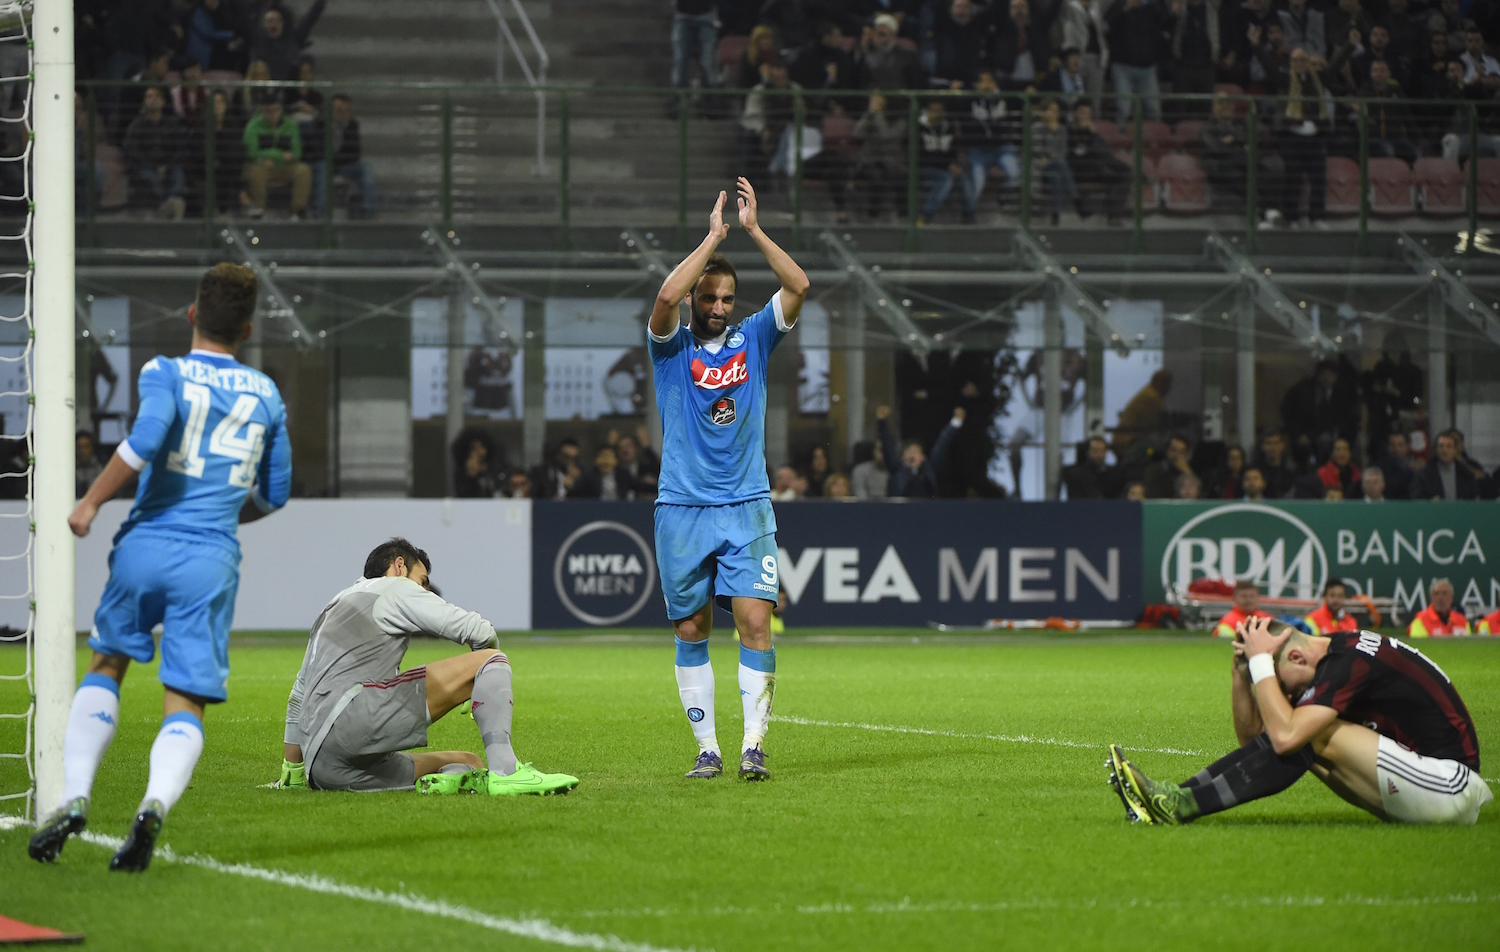 Higuain celebrates a goal against Milan earlier this season. | OLIVIER MORIN/AFP/Getty Images